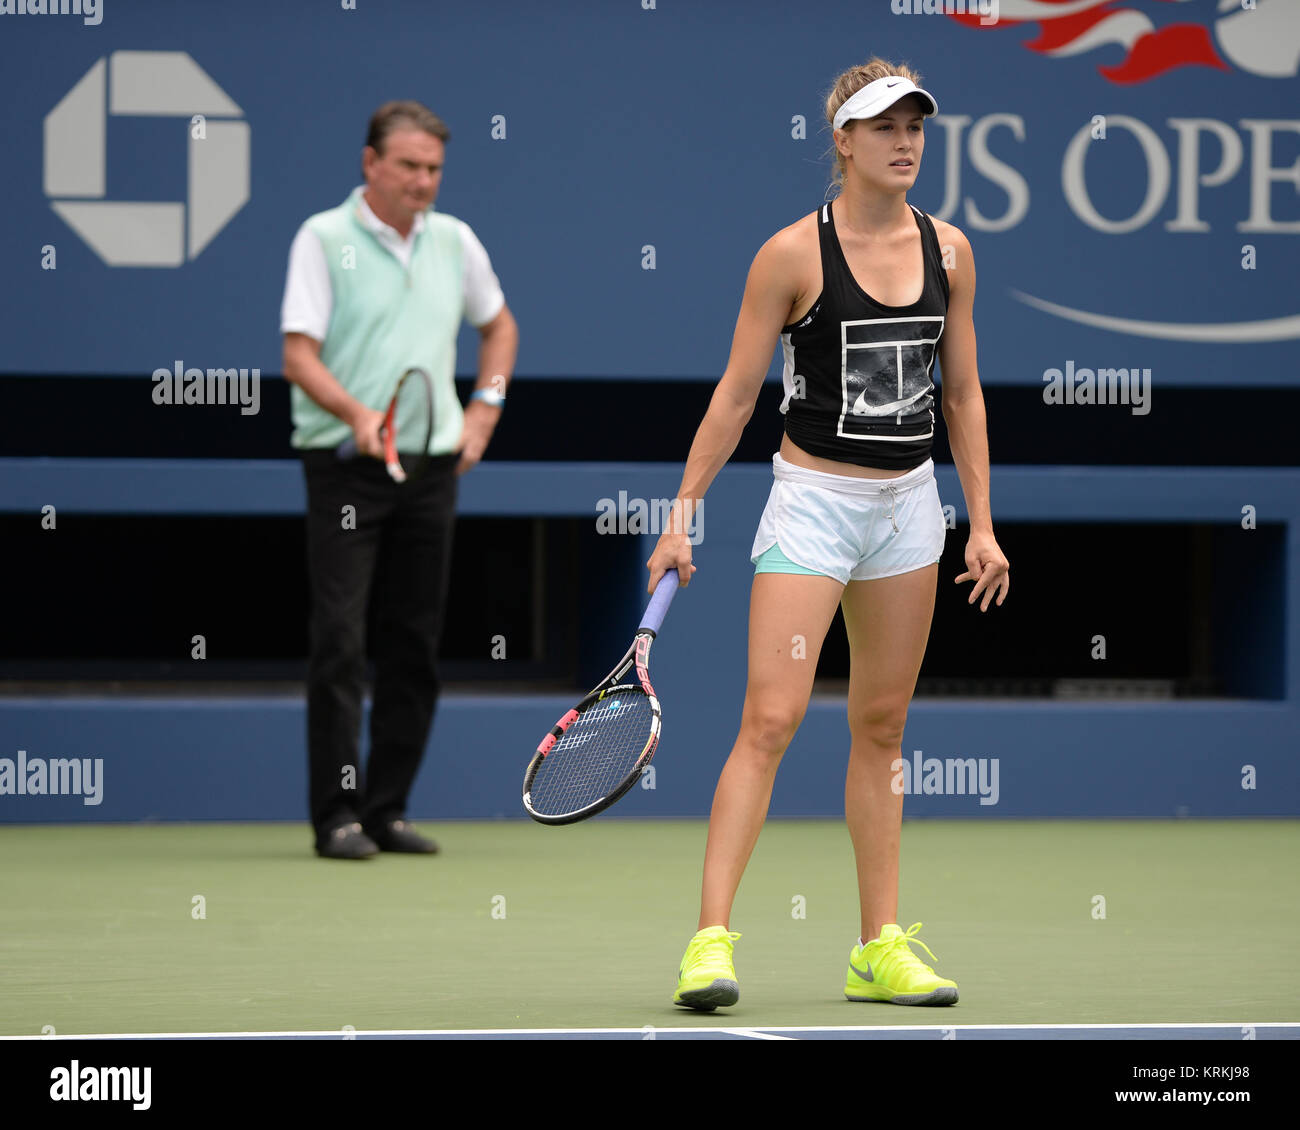 NEW YORK, NY - AUGUST 30: Eugenie Bouchard and coach Jimmy Connors on the  practice court at the USTA at the USTA Billie Jean King National Tennis  Center on August 30, 2015